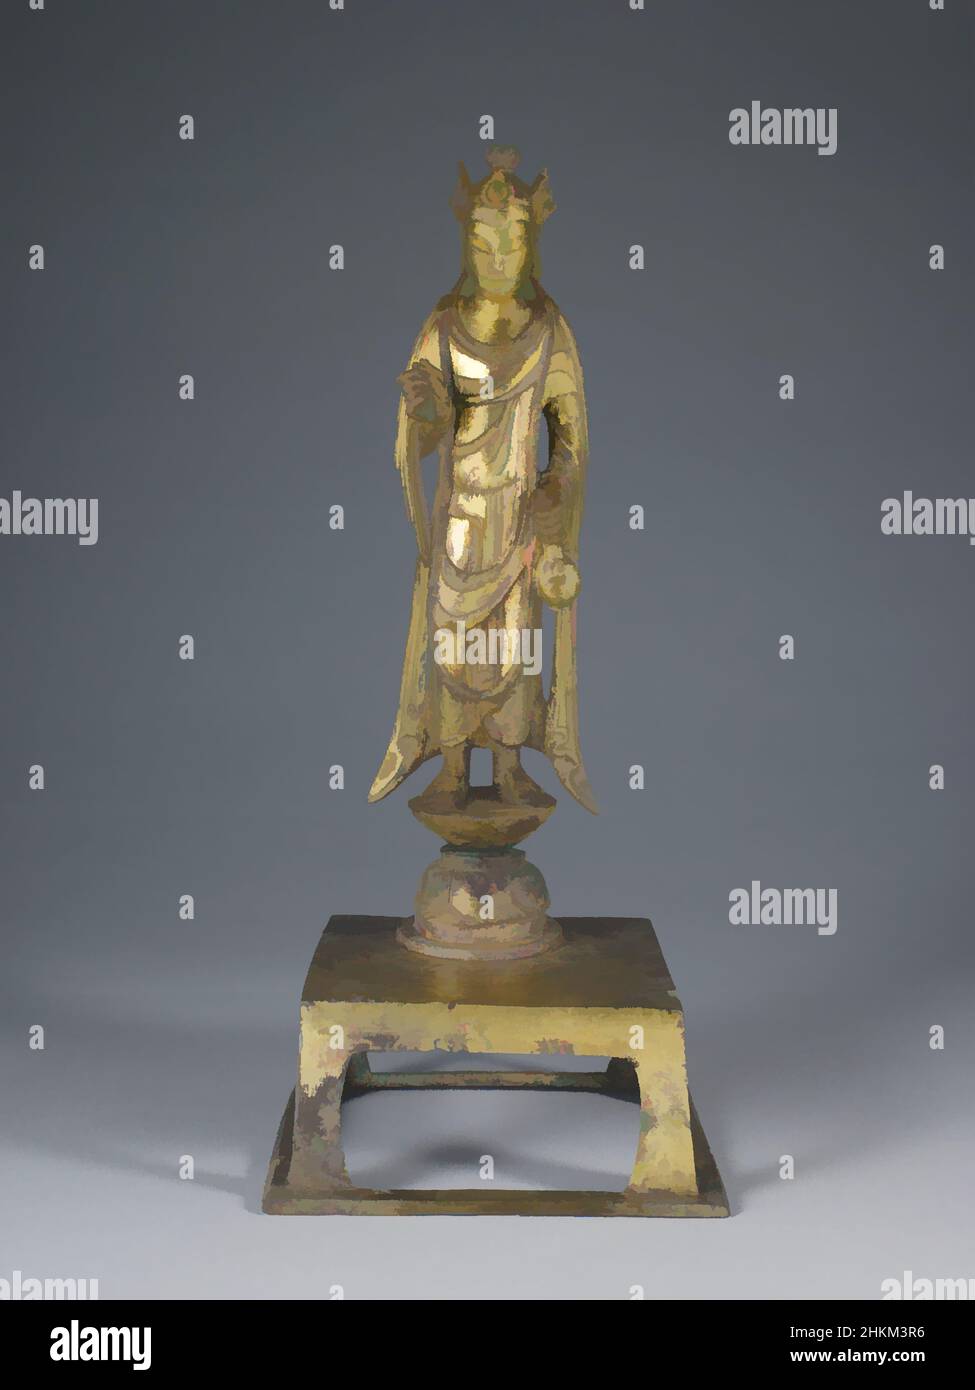 Art inspired by Standing Bodhisattva Avalokiteśvara (Guanyin), Chinese, Sui dynasty, 581-618, late 6th century, Bronze with gilding, Made in China, Asia, Metalwork, sculpture, height of figure and stand: 10 5/8 in. (27 cm, Classic works modernized by Artotop with a splash of modernity. Shapes, color and value, eye-catching visual impact on art. Emotions through freedom of artworks in a contemporary way. A timeless message pursuing a wildly creative new direction. Artists turning to the digital medium and creating the Artotop NFT Stock Photo